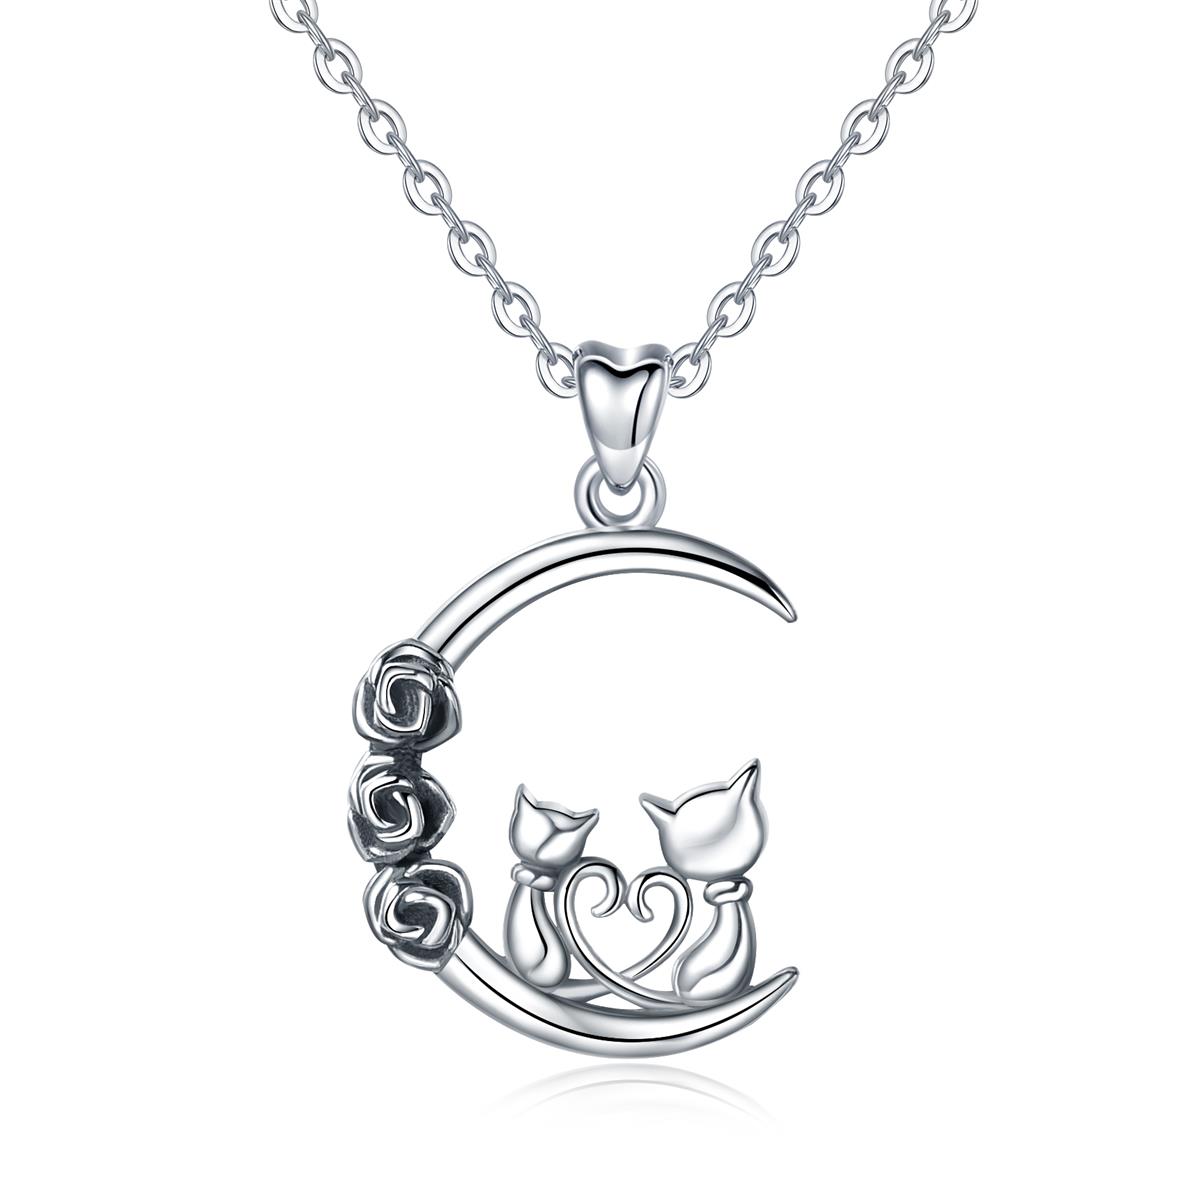 Merryshine Jewelry S925 Sterling Silver Moon and Cats Necklace Pendant for Couples